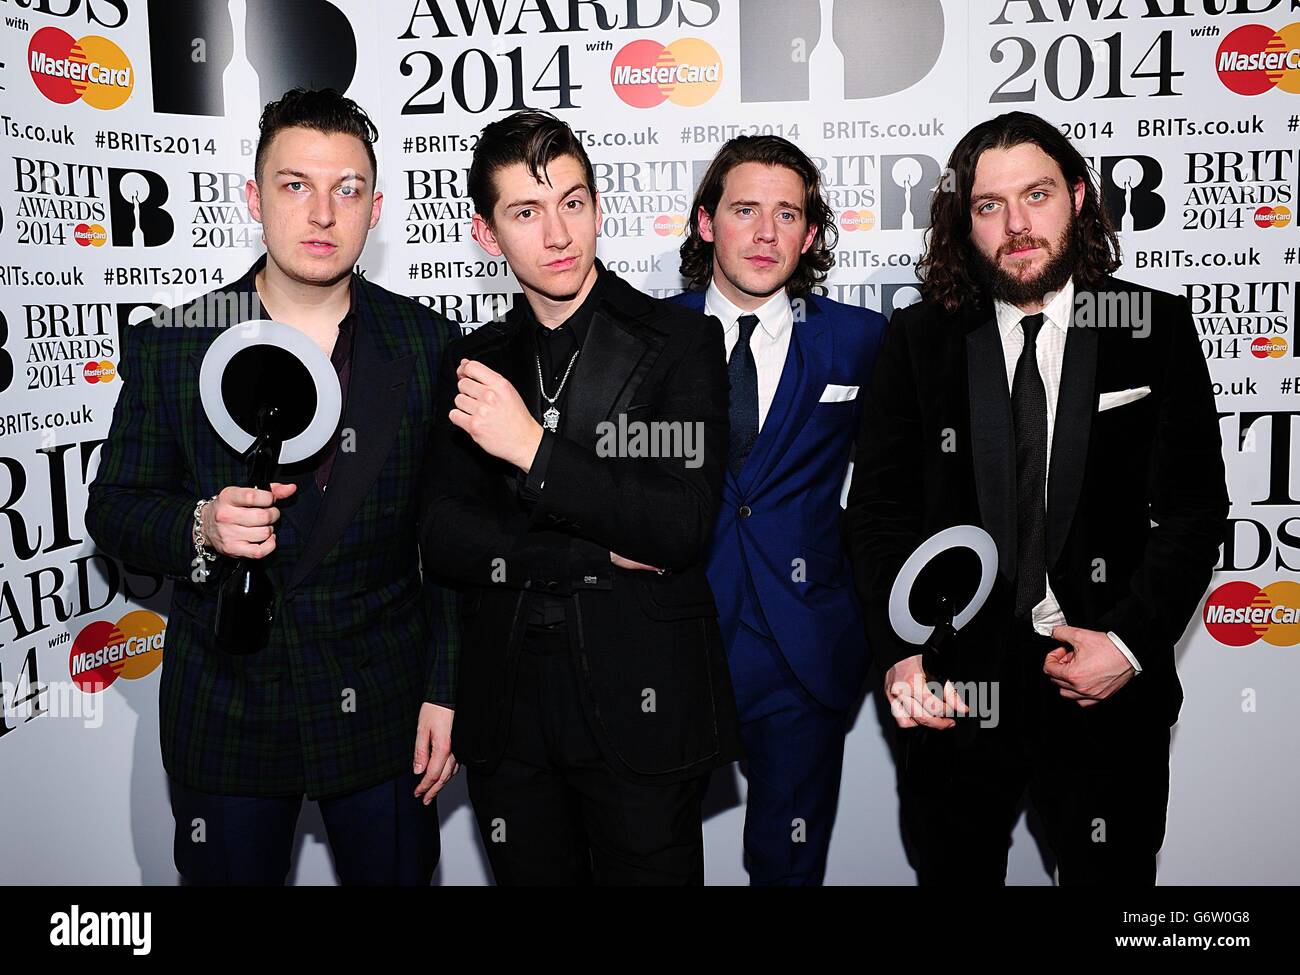 (L-R) Matt Helders, Alex Turner Jamie Cook and Nick O'Malley from Arctic Monkeys with their awards in the press room at the 2014 Brit Awards at the O2 Arena, London. Stock Photo